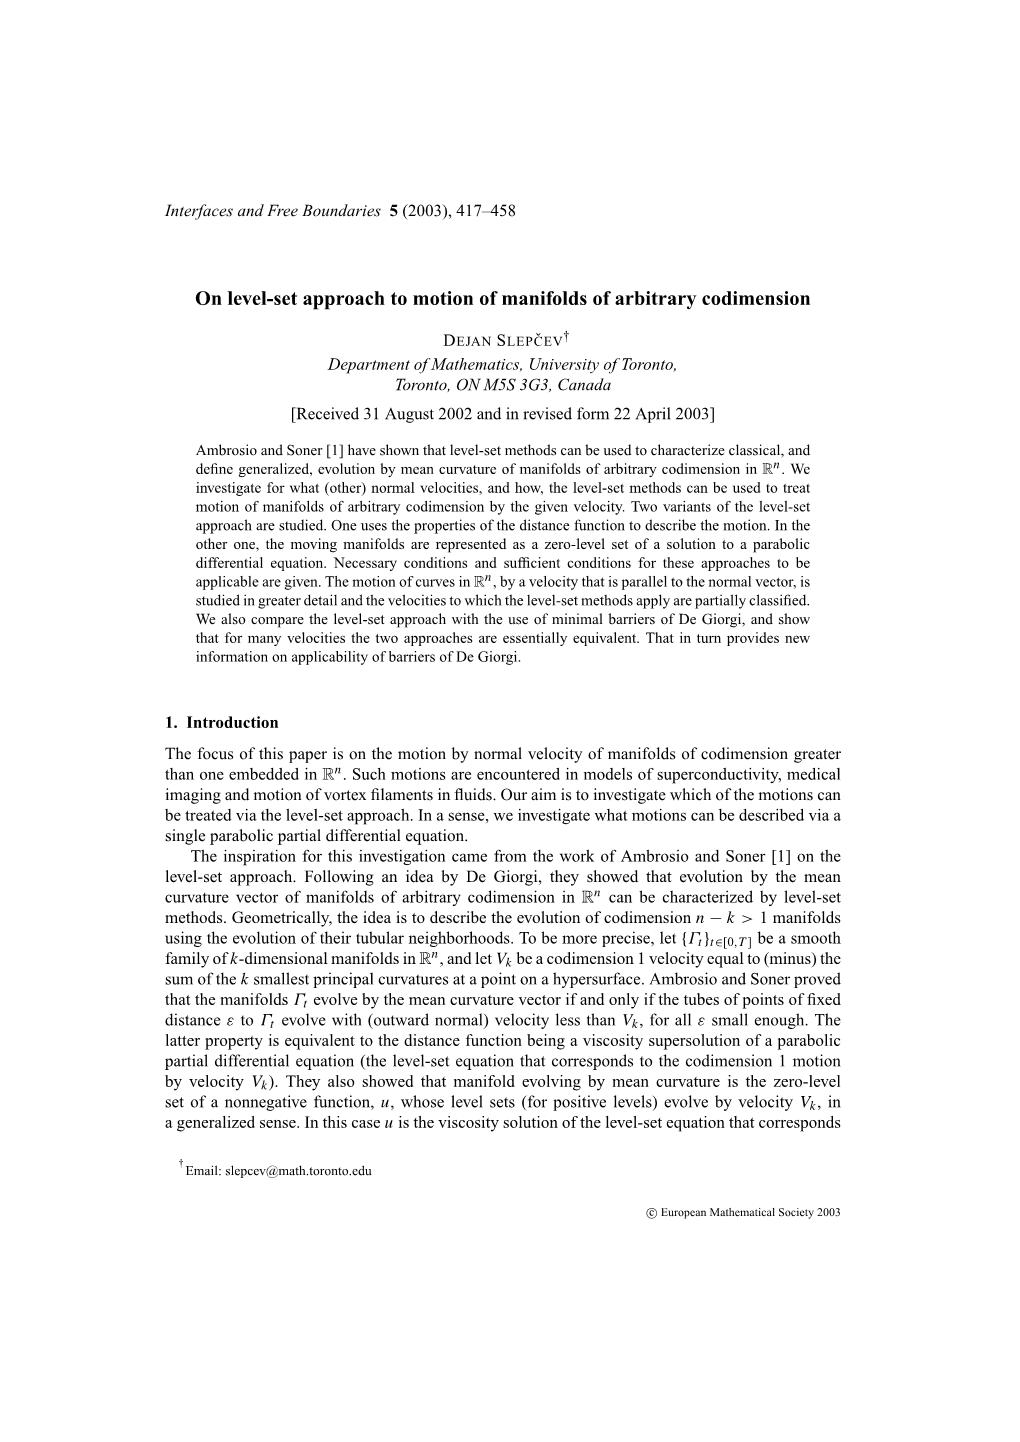 On Level-Set Approach to Motion of Manifolds of Arbitrary Codimension